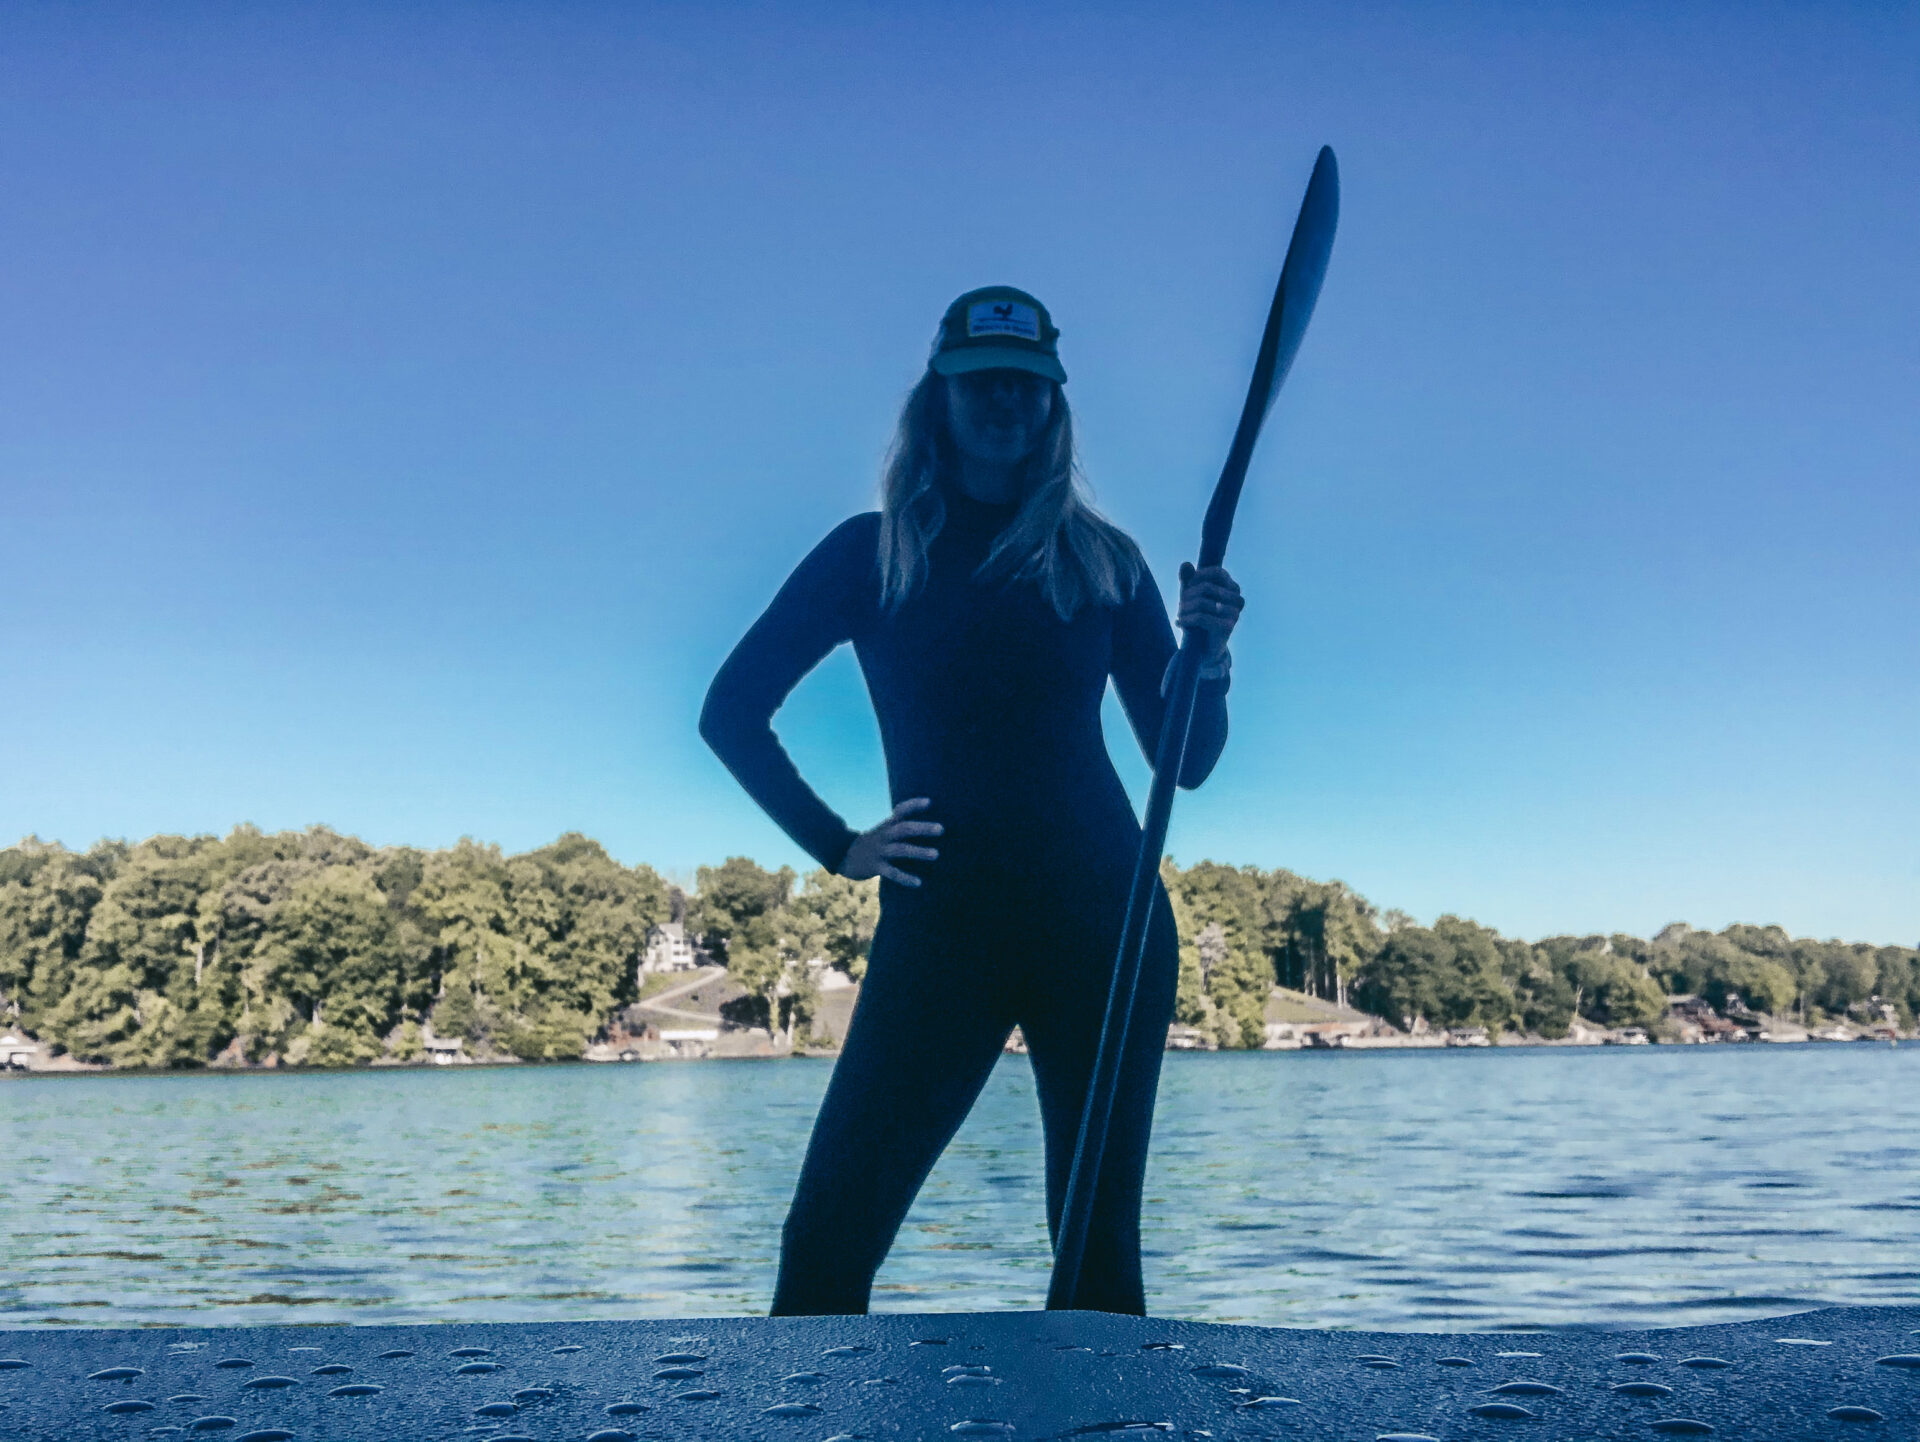 How to Repair, Restore and Care for a Stand Up Paddleboard (SUP)